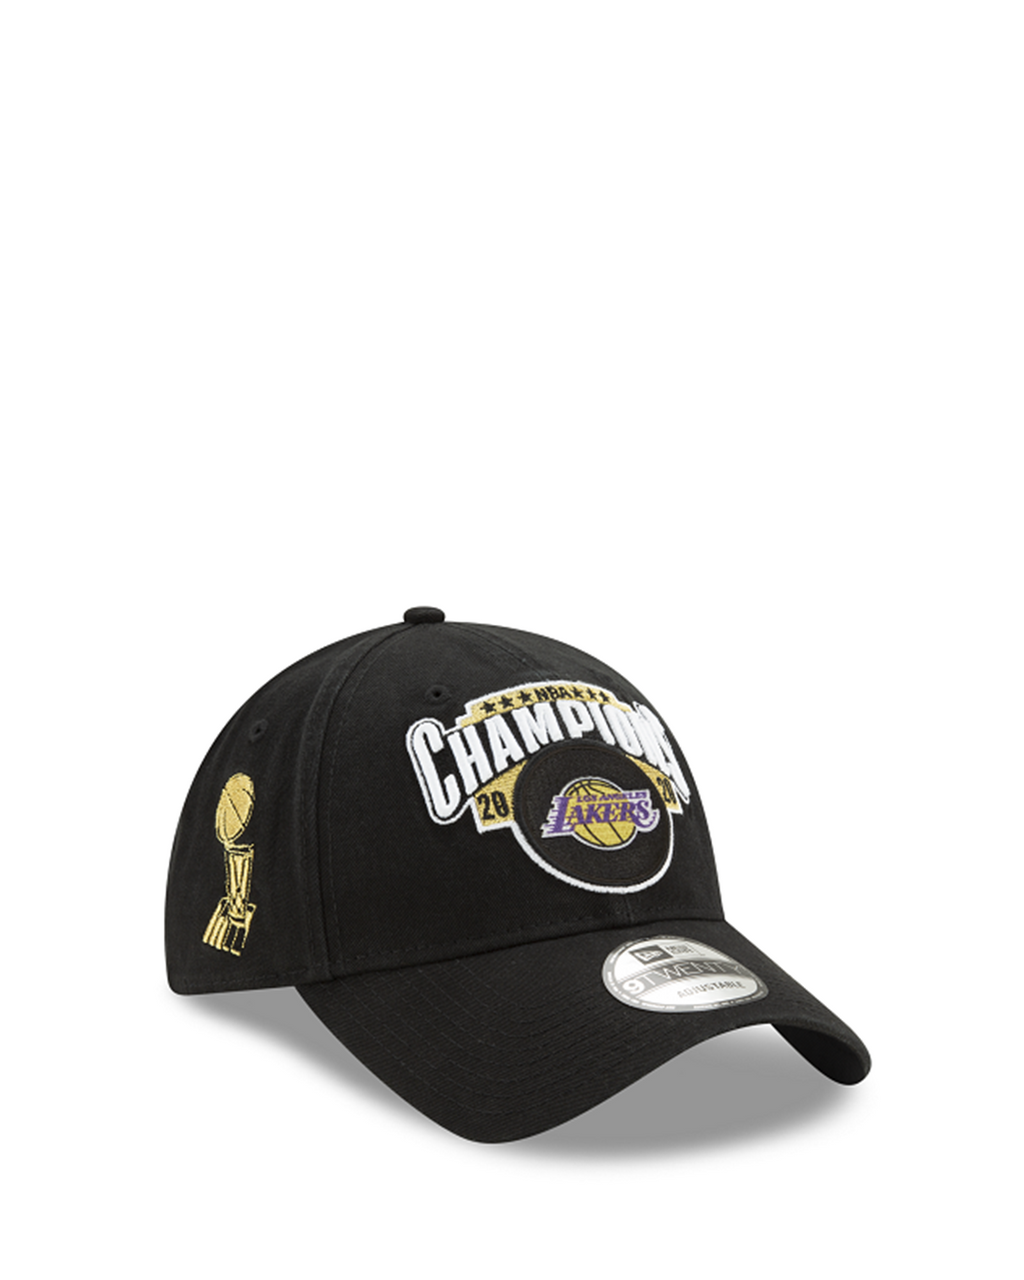 lakers store canada